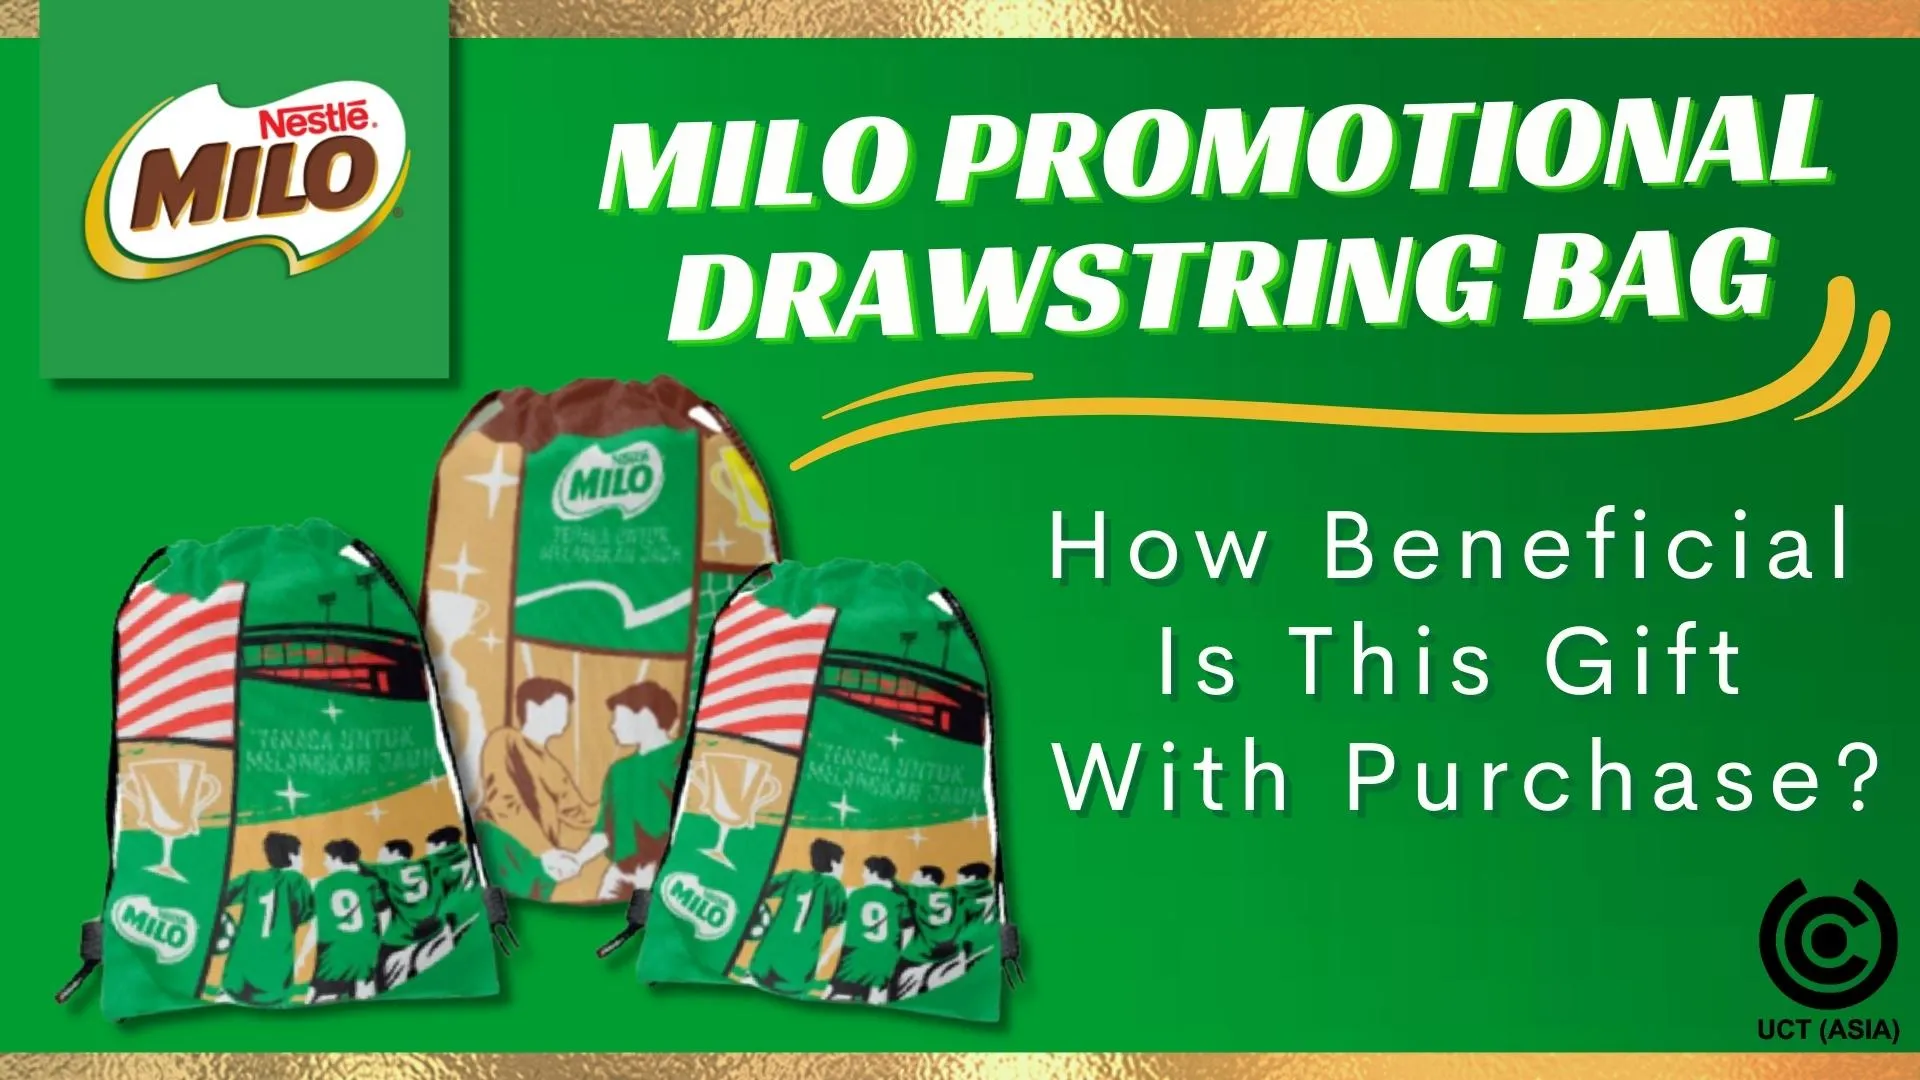 Milo Promotional Drawstring Bag – How Beneficial Is This Gift With Purchase